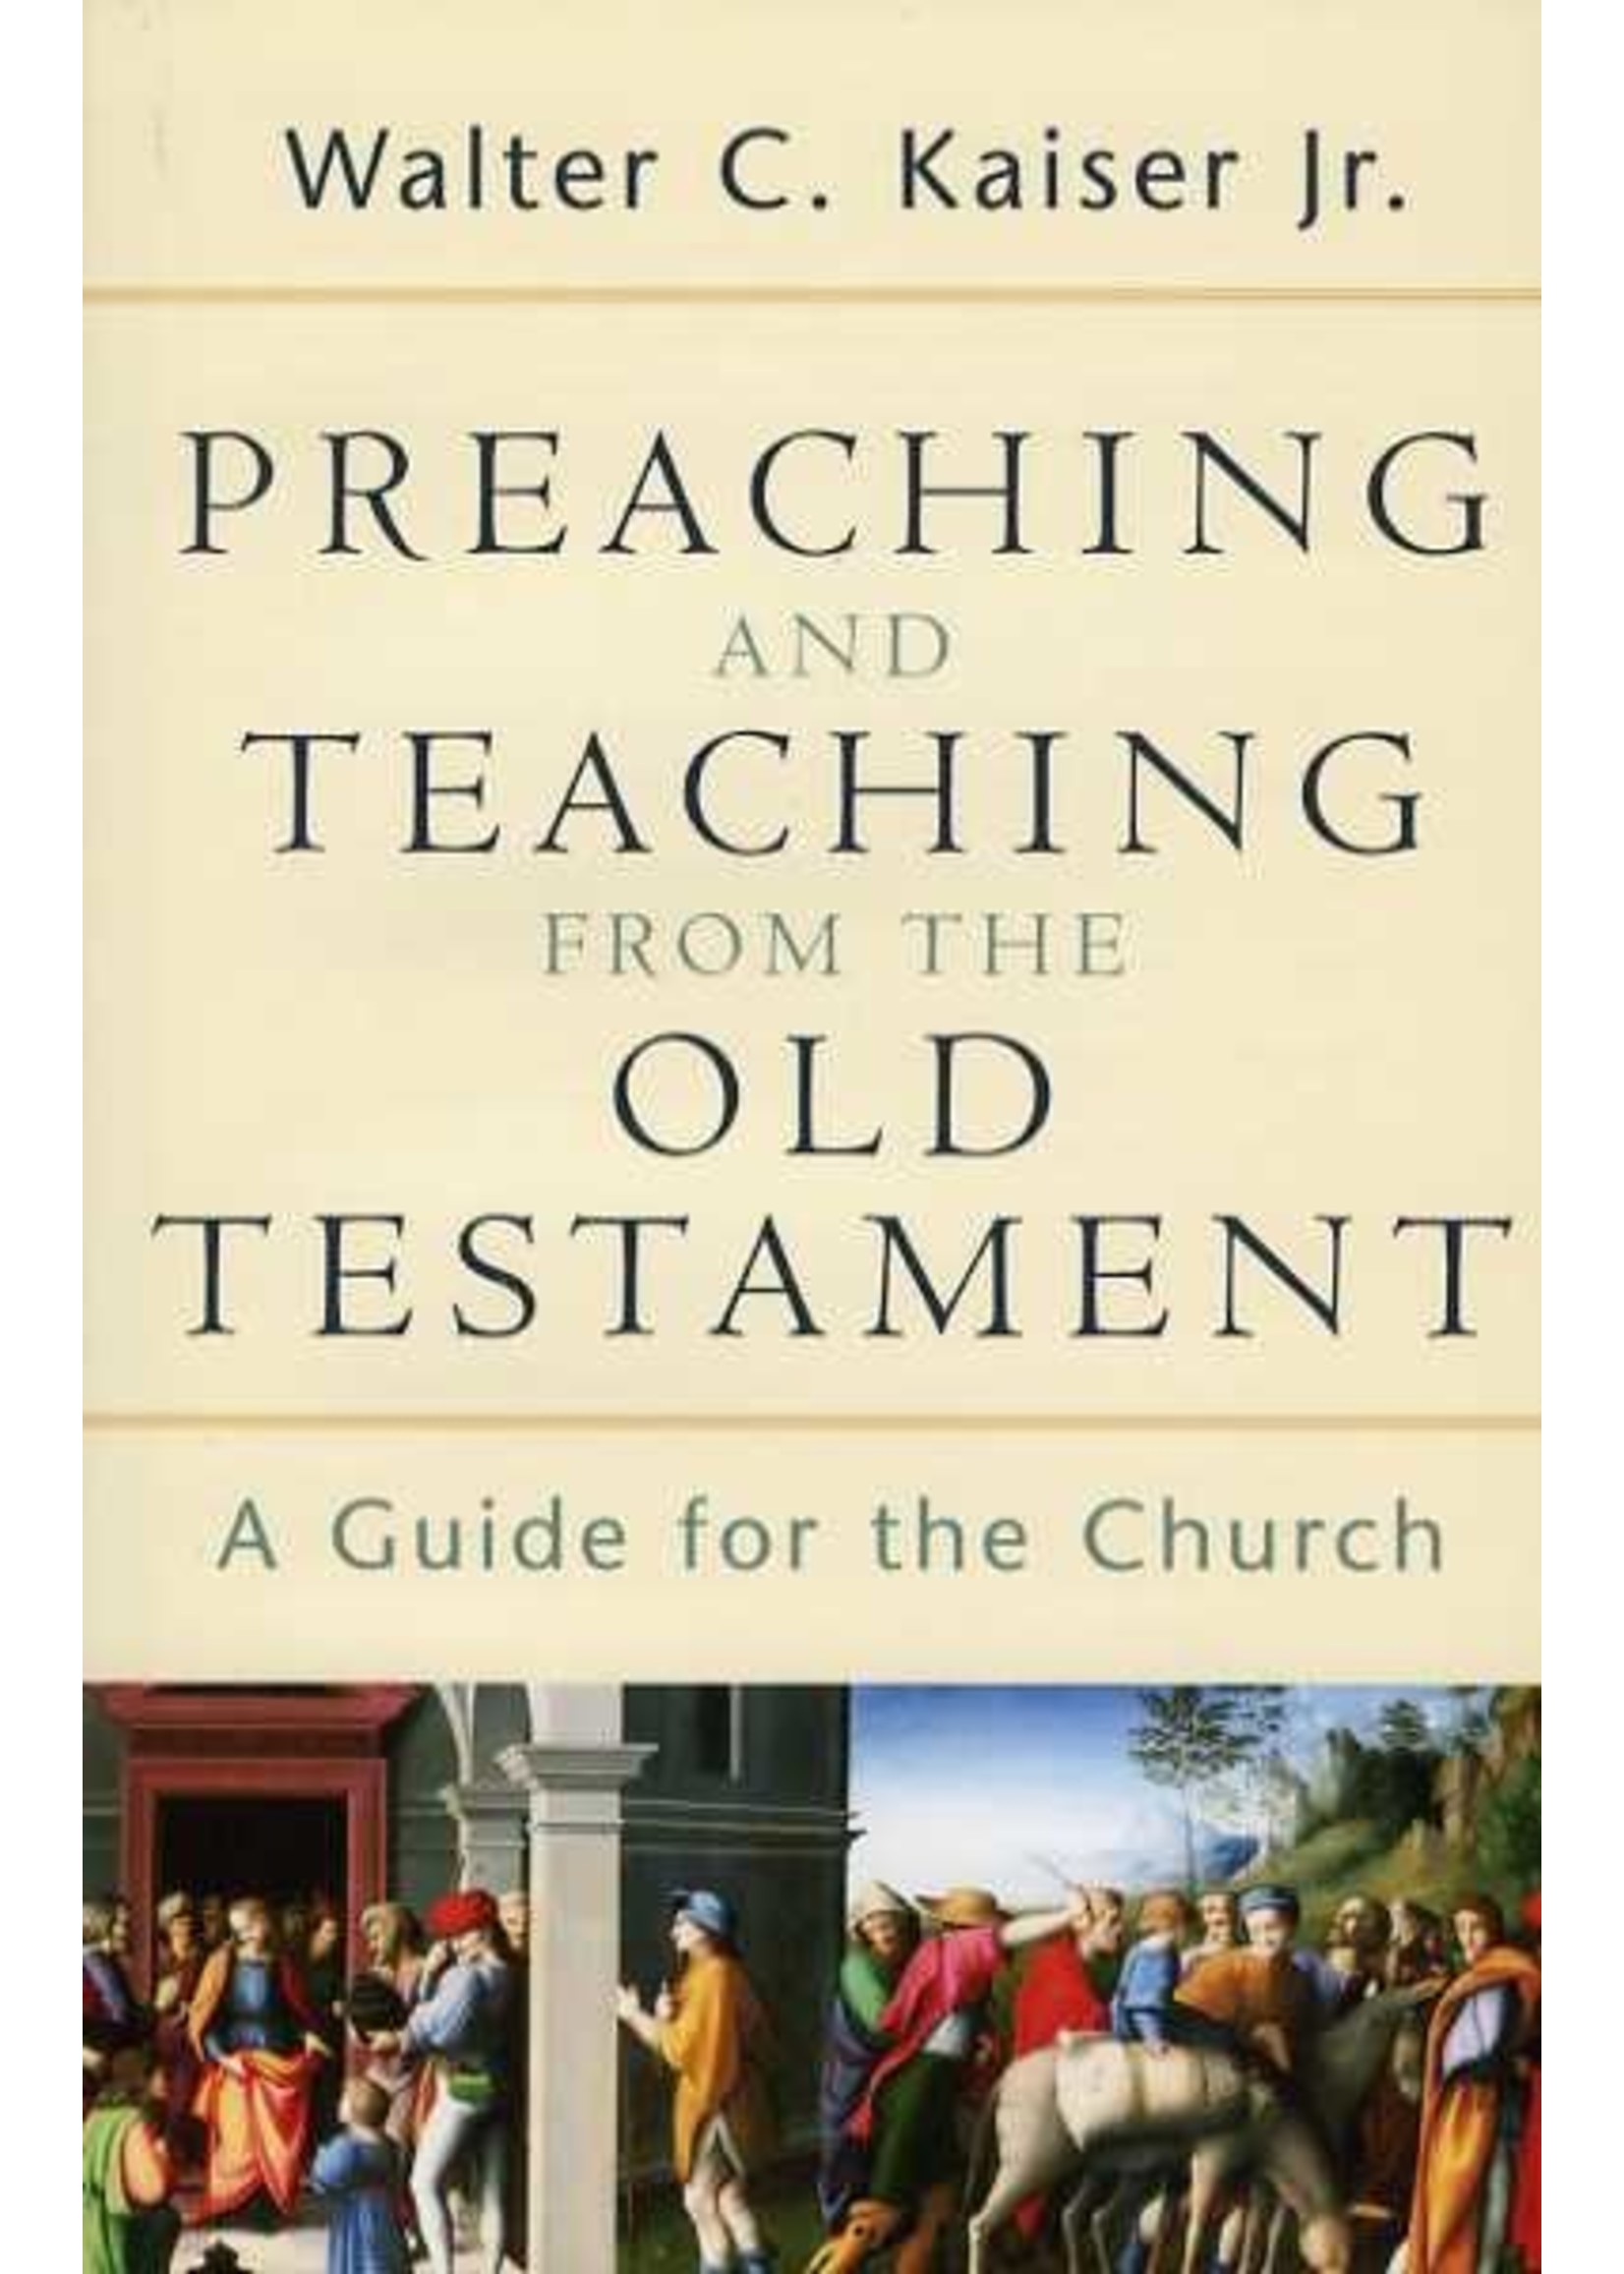 Baker Publishing Preaching and Teaching from the Old Testament - Walter Kaiser